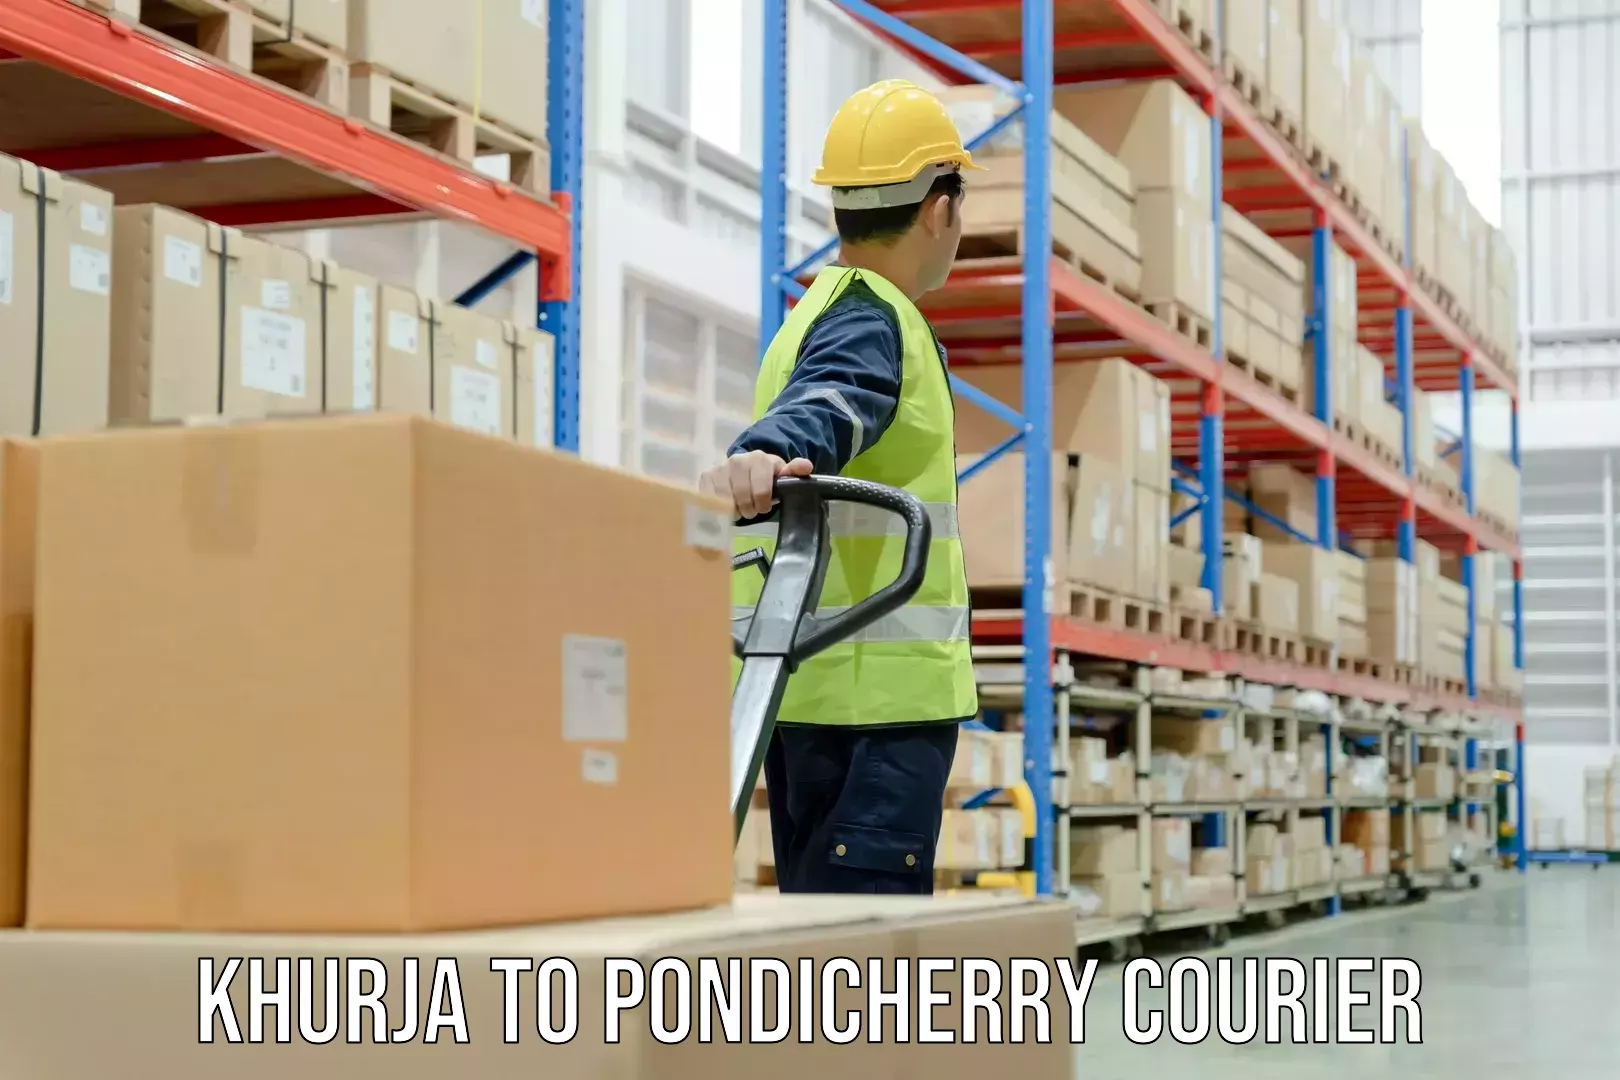 Business delivery service Khurja to Pondicherry